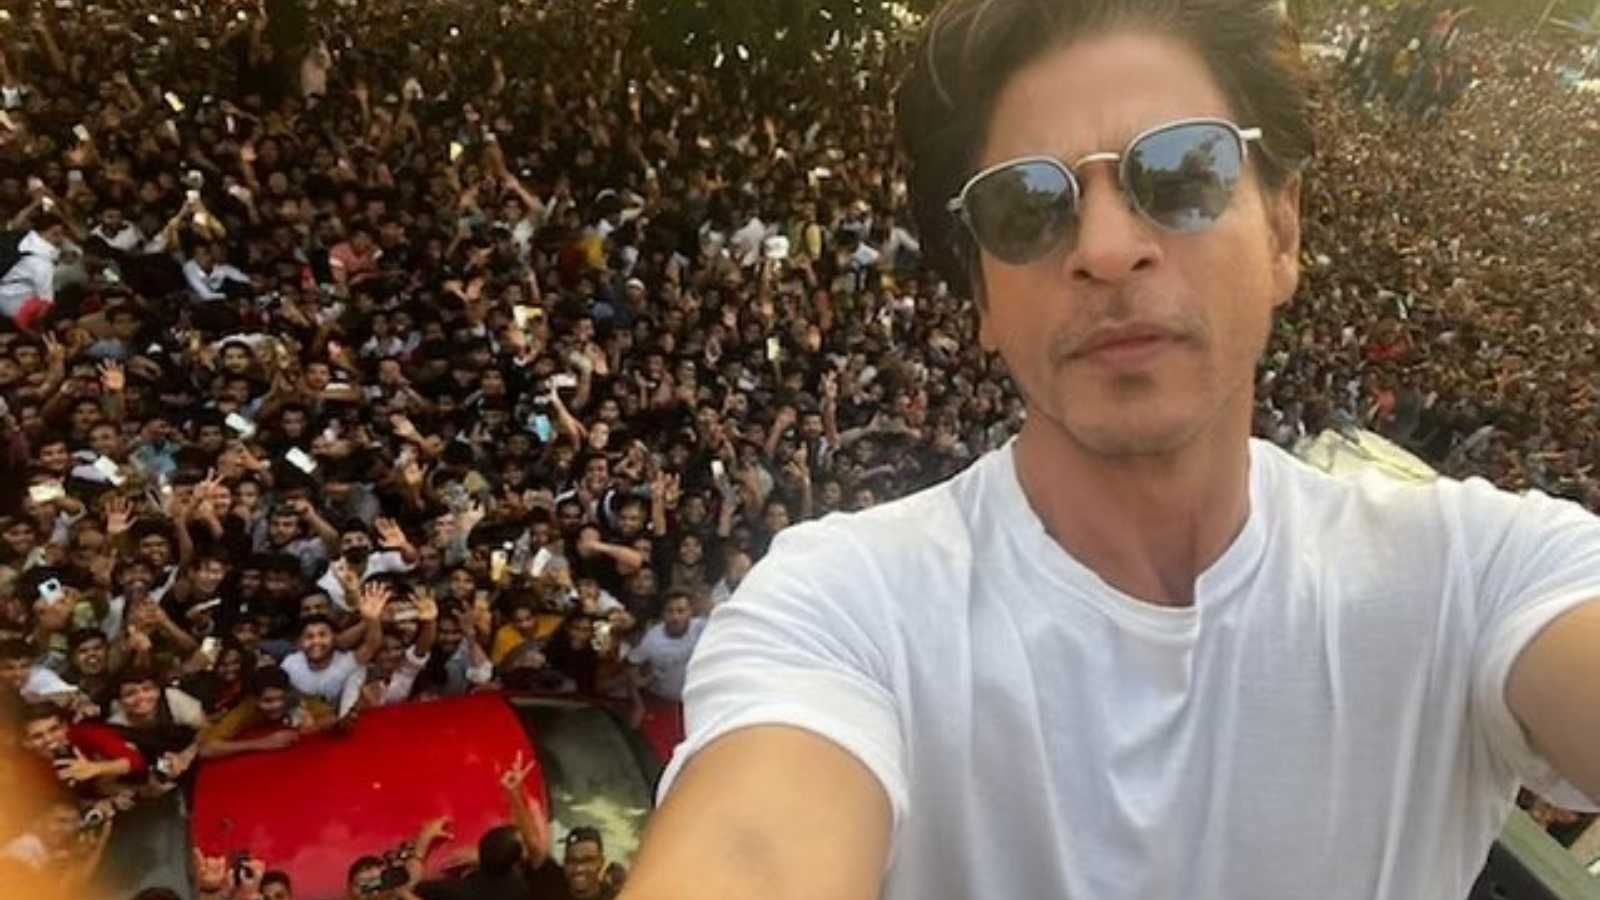 Shah Rukh Khan Reveals Son Abram S Reaction To The Big Crowd That Gathered To Wish Him On 57th